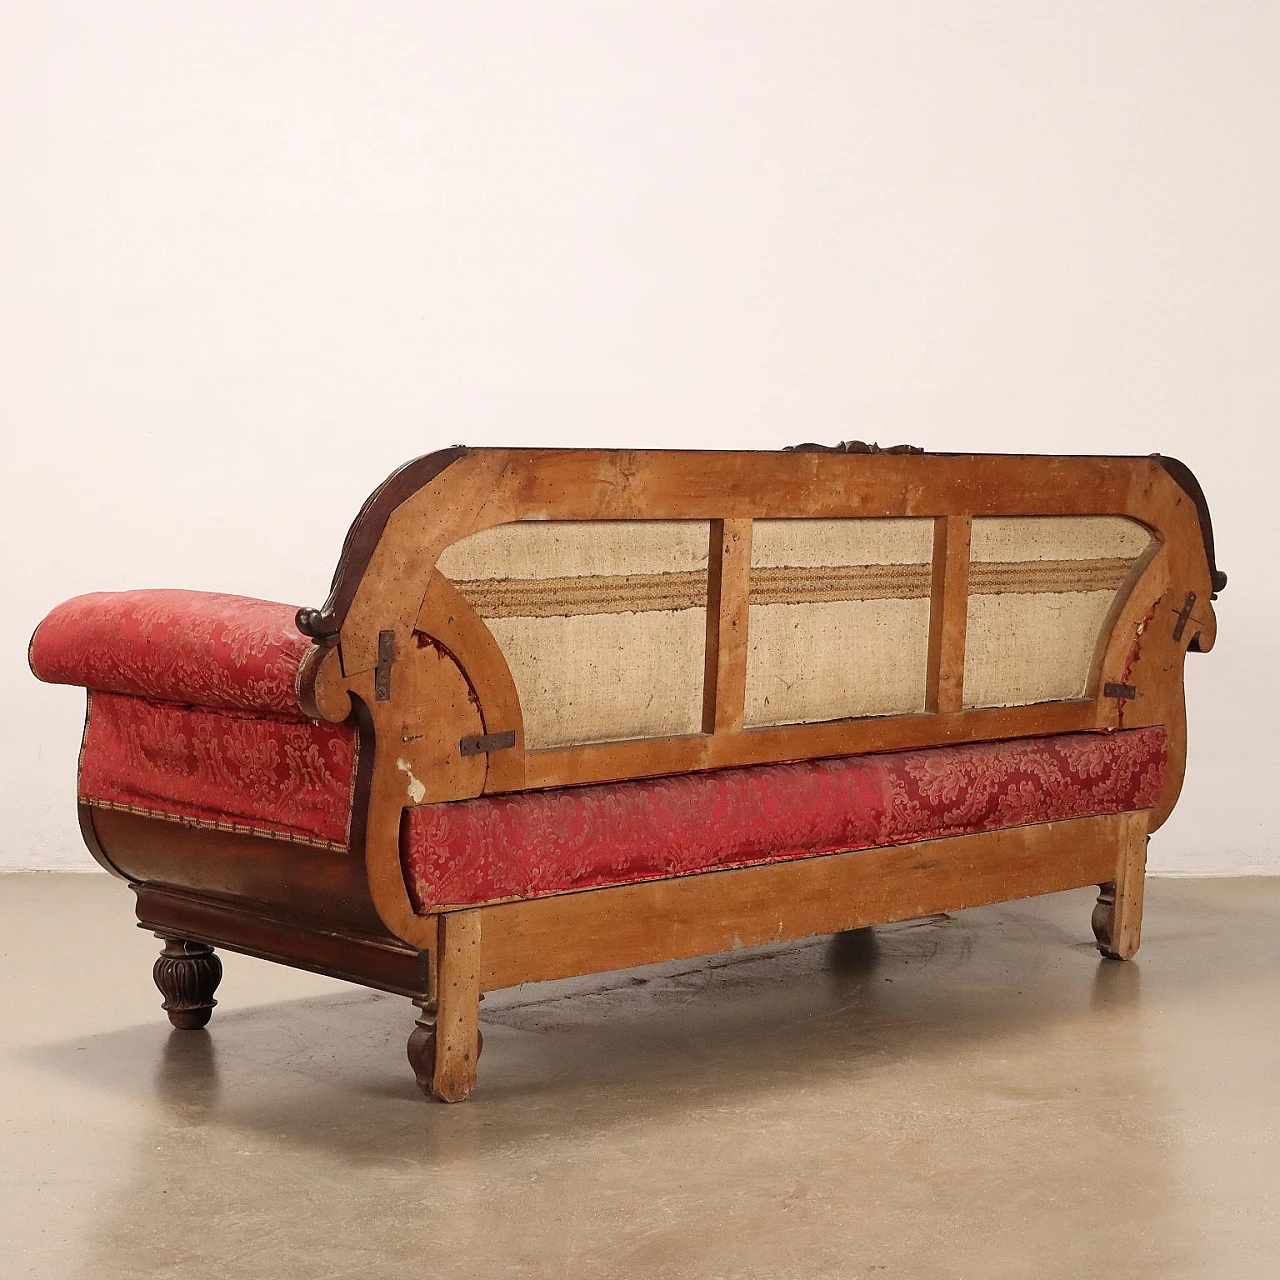 Carved mahogany sofa with pink brocade fabric, 19th century 10